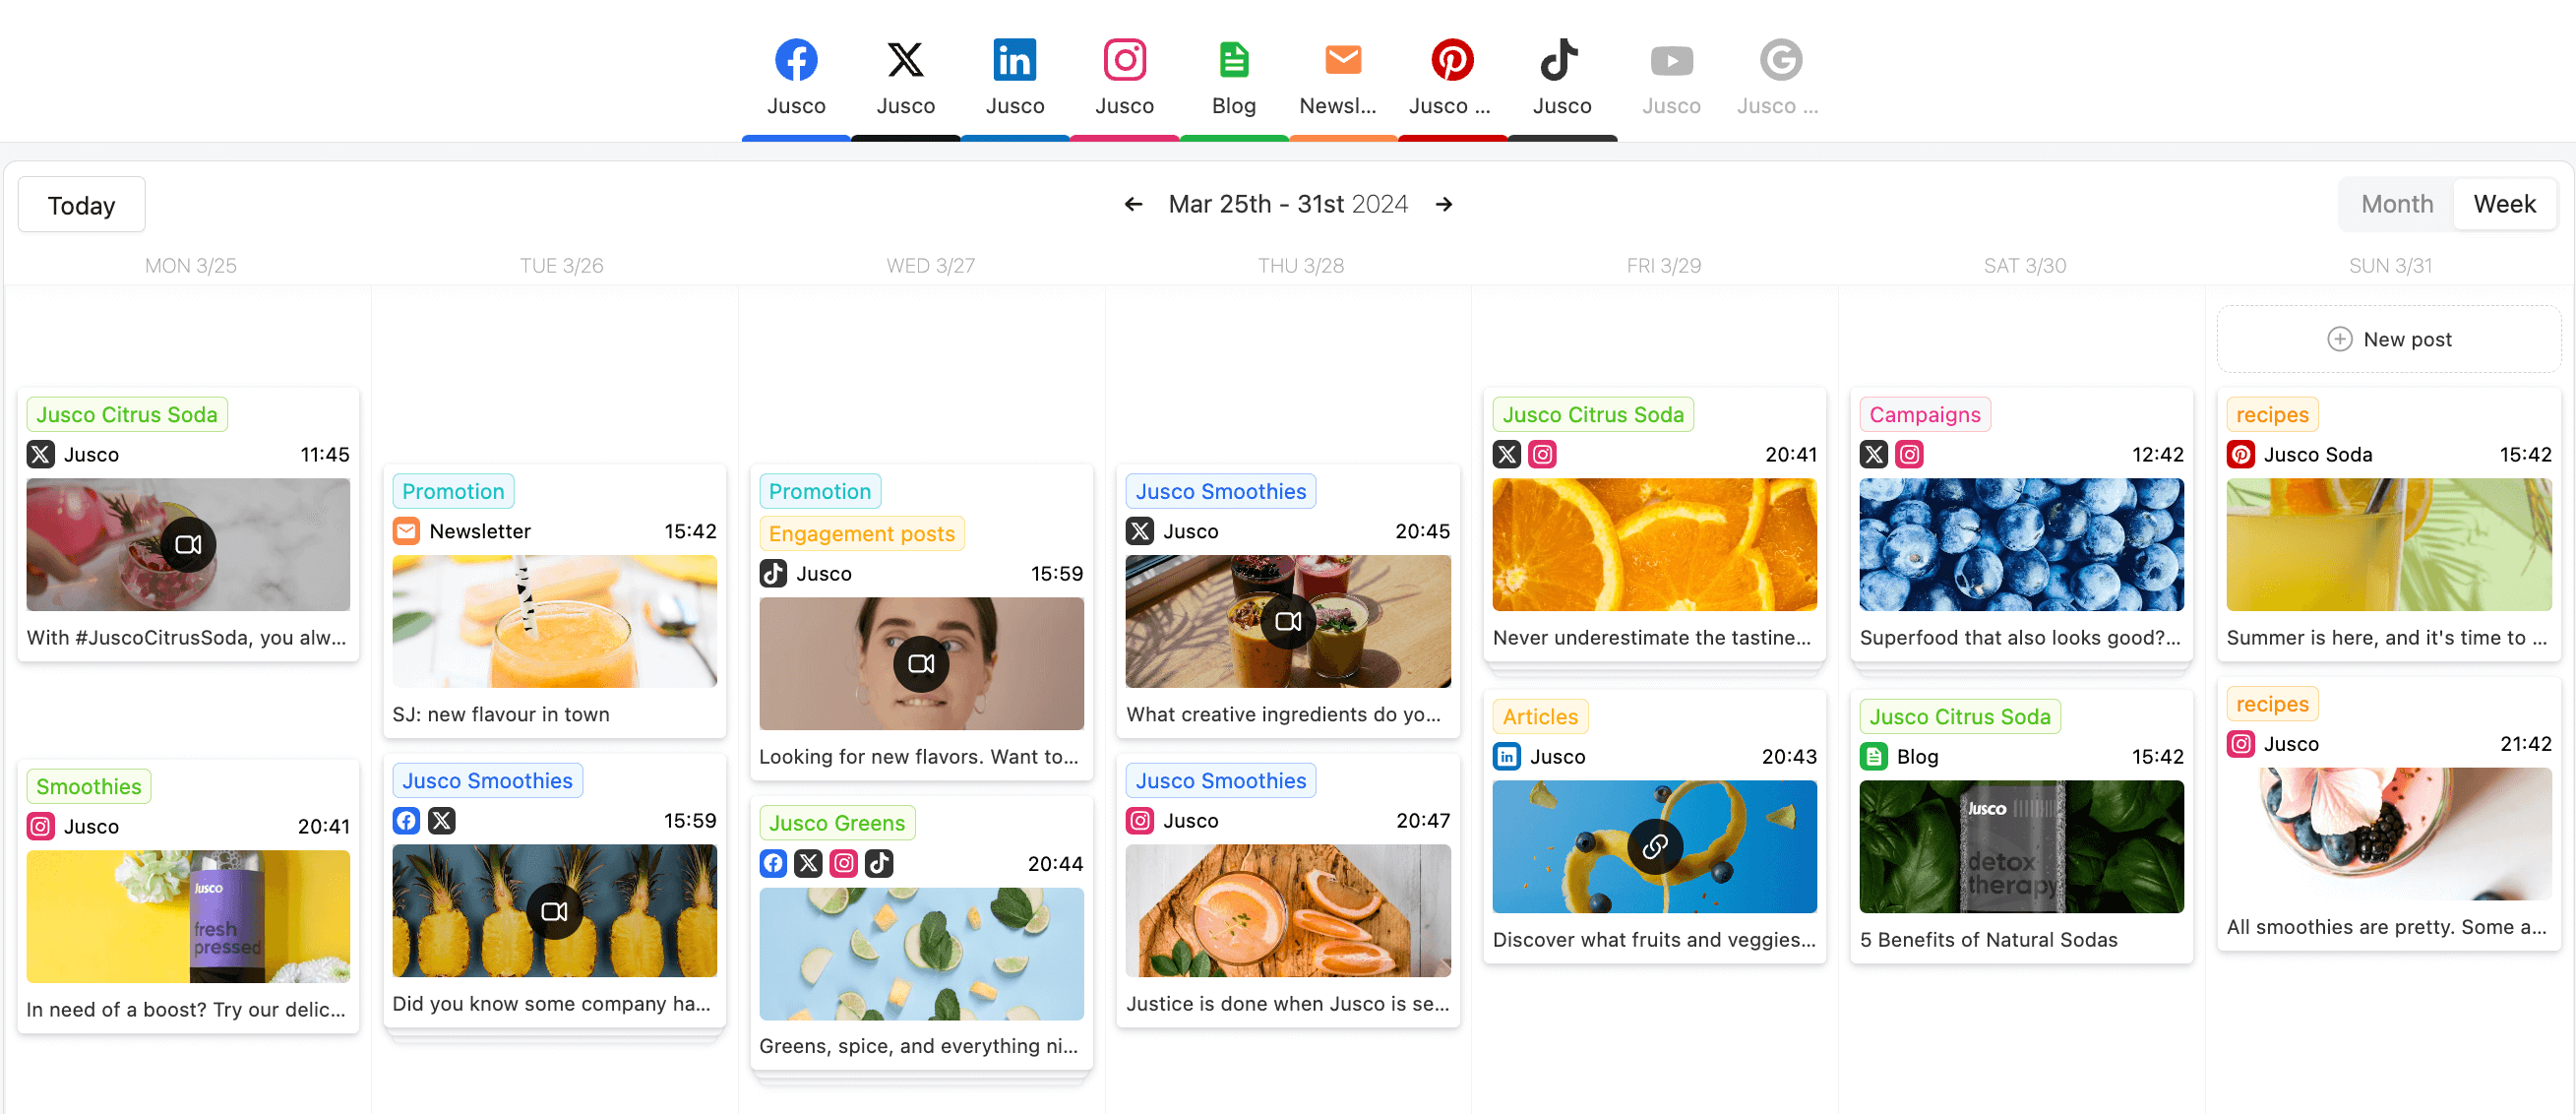 Planable content calendar showing scheduled posts for Jusco Smoothies and Citrus Soda across various social media platforms and newsletters.